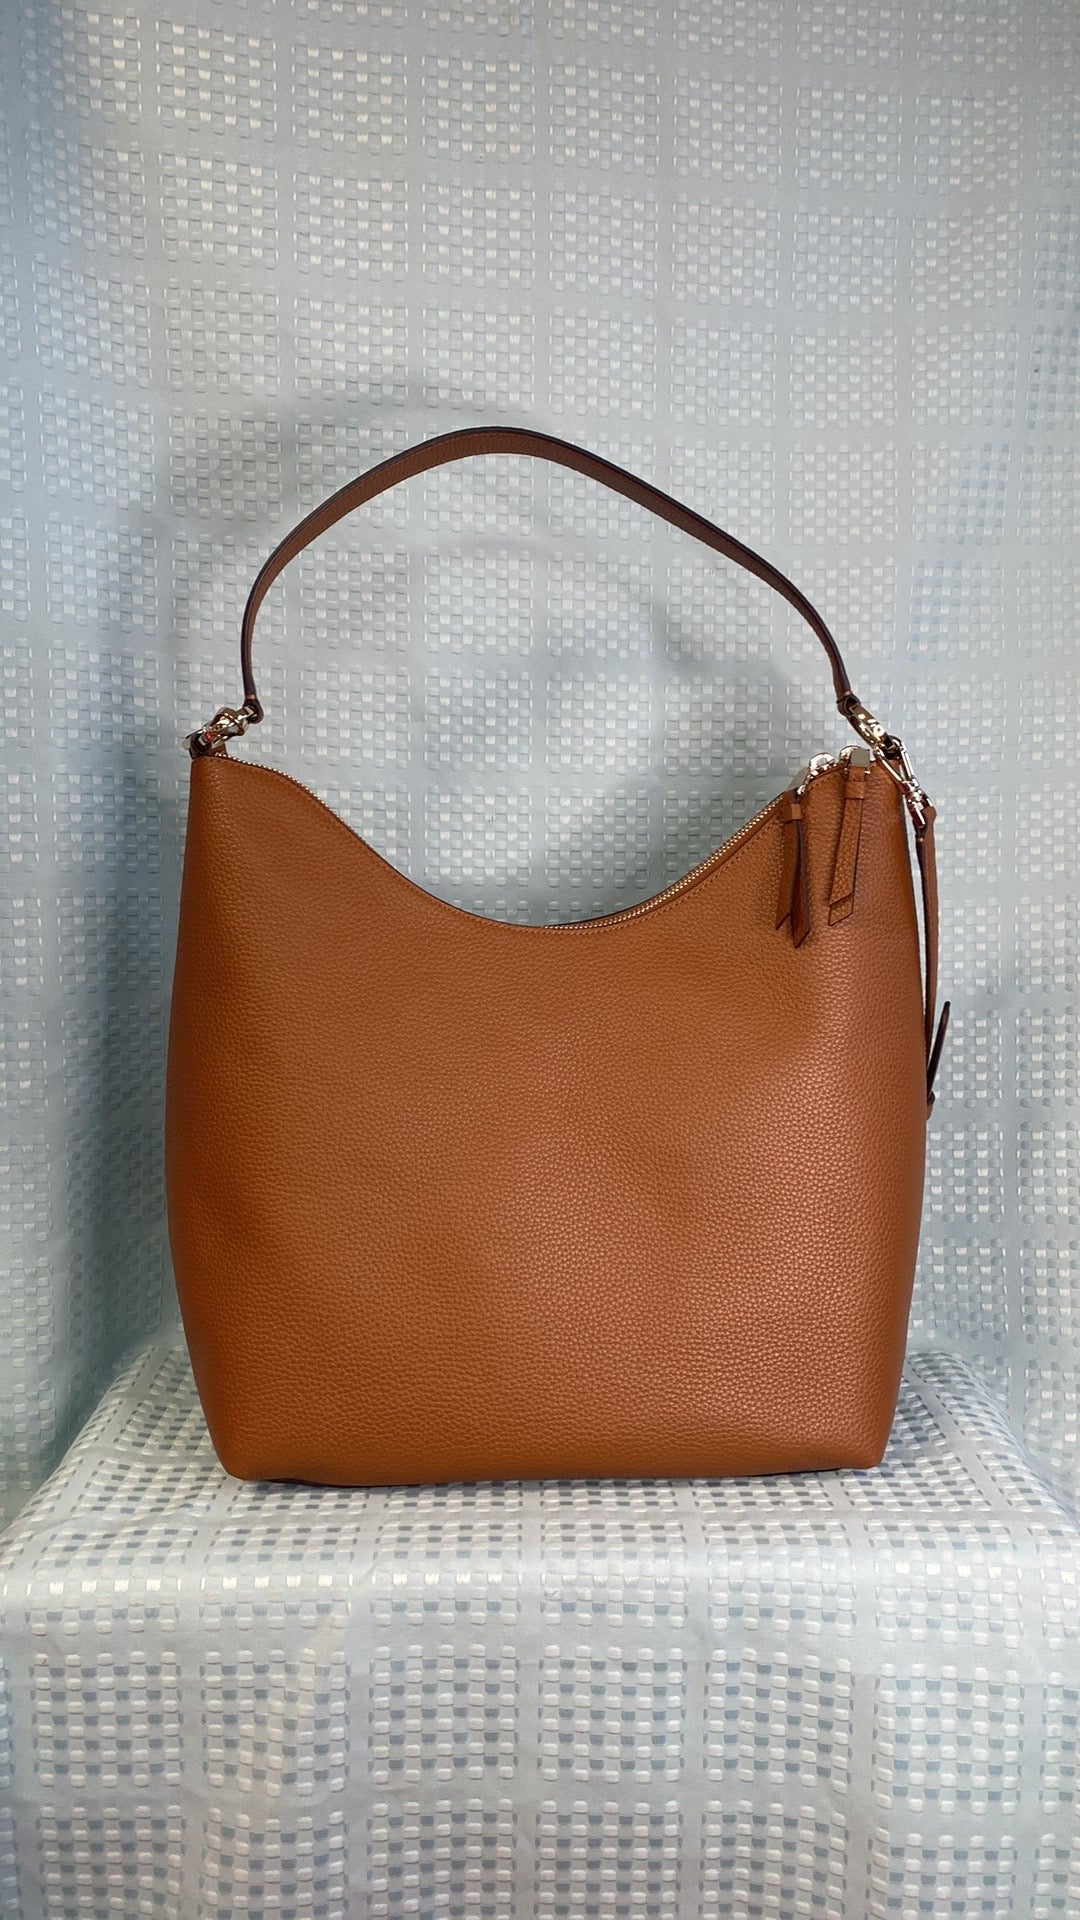 Kate Spade New York Zippy Pebble Leather Shoulder In Warm Ginger